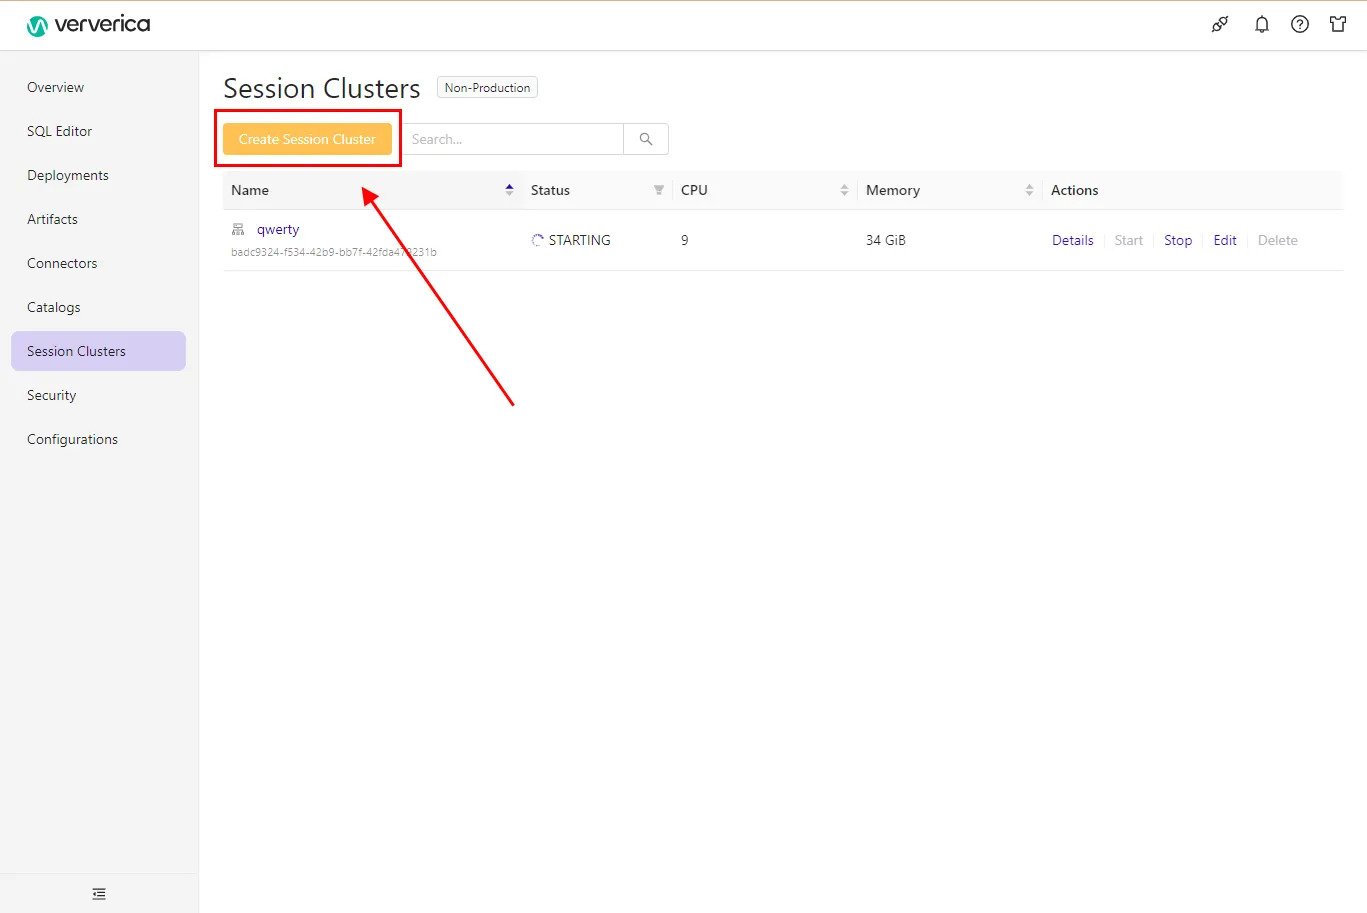 Create a session cluster